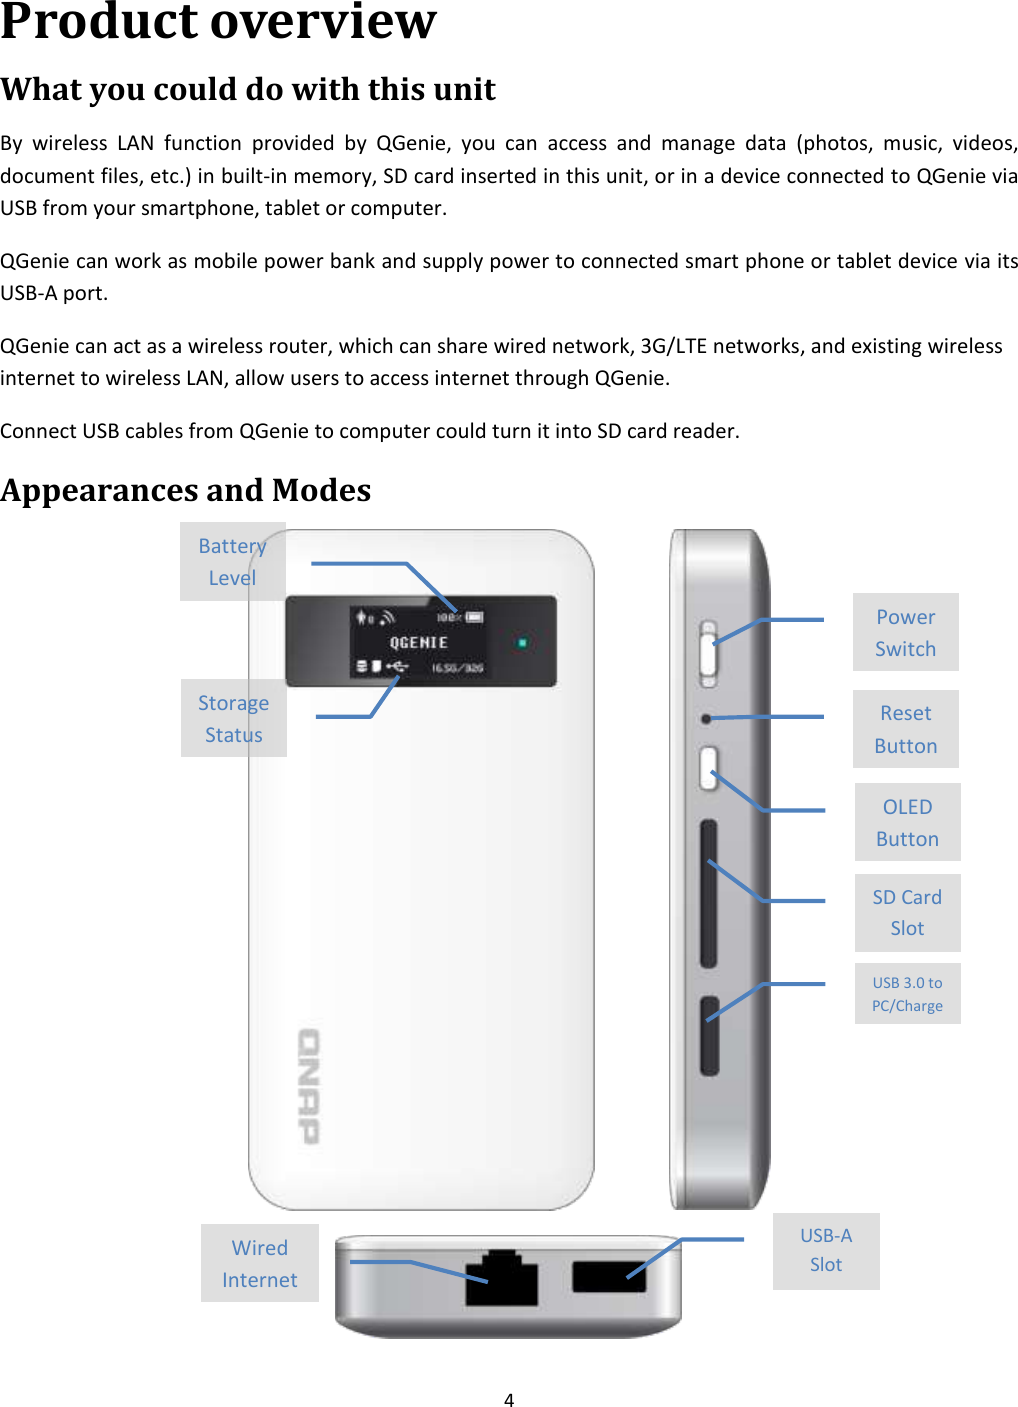 4  Product overview What you could do with this unit By  wireless  LAN  function  provided  by  QGenie,  you  can  access  and  manage  data  (photos,  music,  videos, document files, etc.) in built-in memory, SD card inserted in this unit, or in a device connected to QGenie via USB from your smartphone, tablet or computer. QGenie can work as mobile power bank and supply power to connected smart phone or tablet device via its USB-A port. QGenie can act as a wireless router, which can share wired network, 3G/LTE networks, and existing wireless internet to wireless LAN, allow users to access internet through QGenie. Connect USB cables from QGenie to computer could turn it into SD card reader. Appearances and Modes        Battery Level Storage Status Power Switch Reset Button OLED Button SD Card Slot USB 3.0 to PC/Charge USB-A Slot Wired Internet 